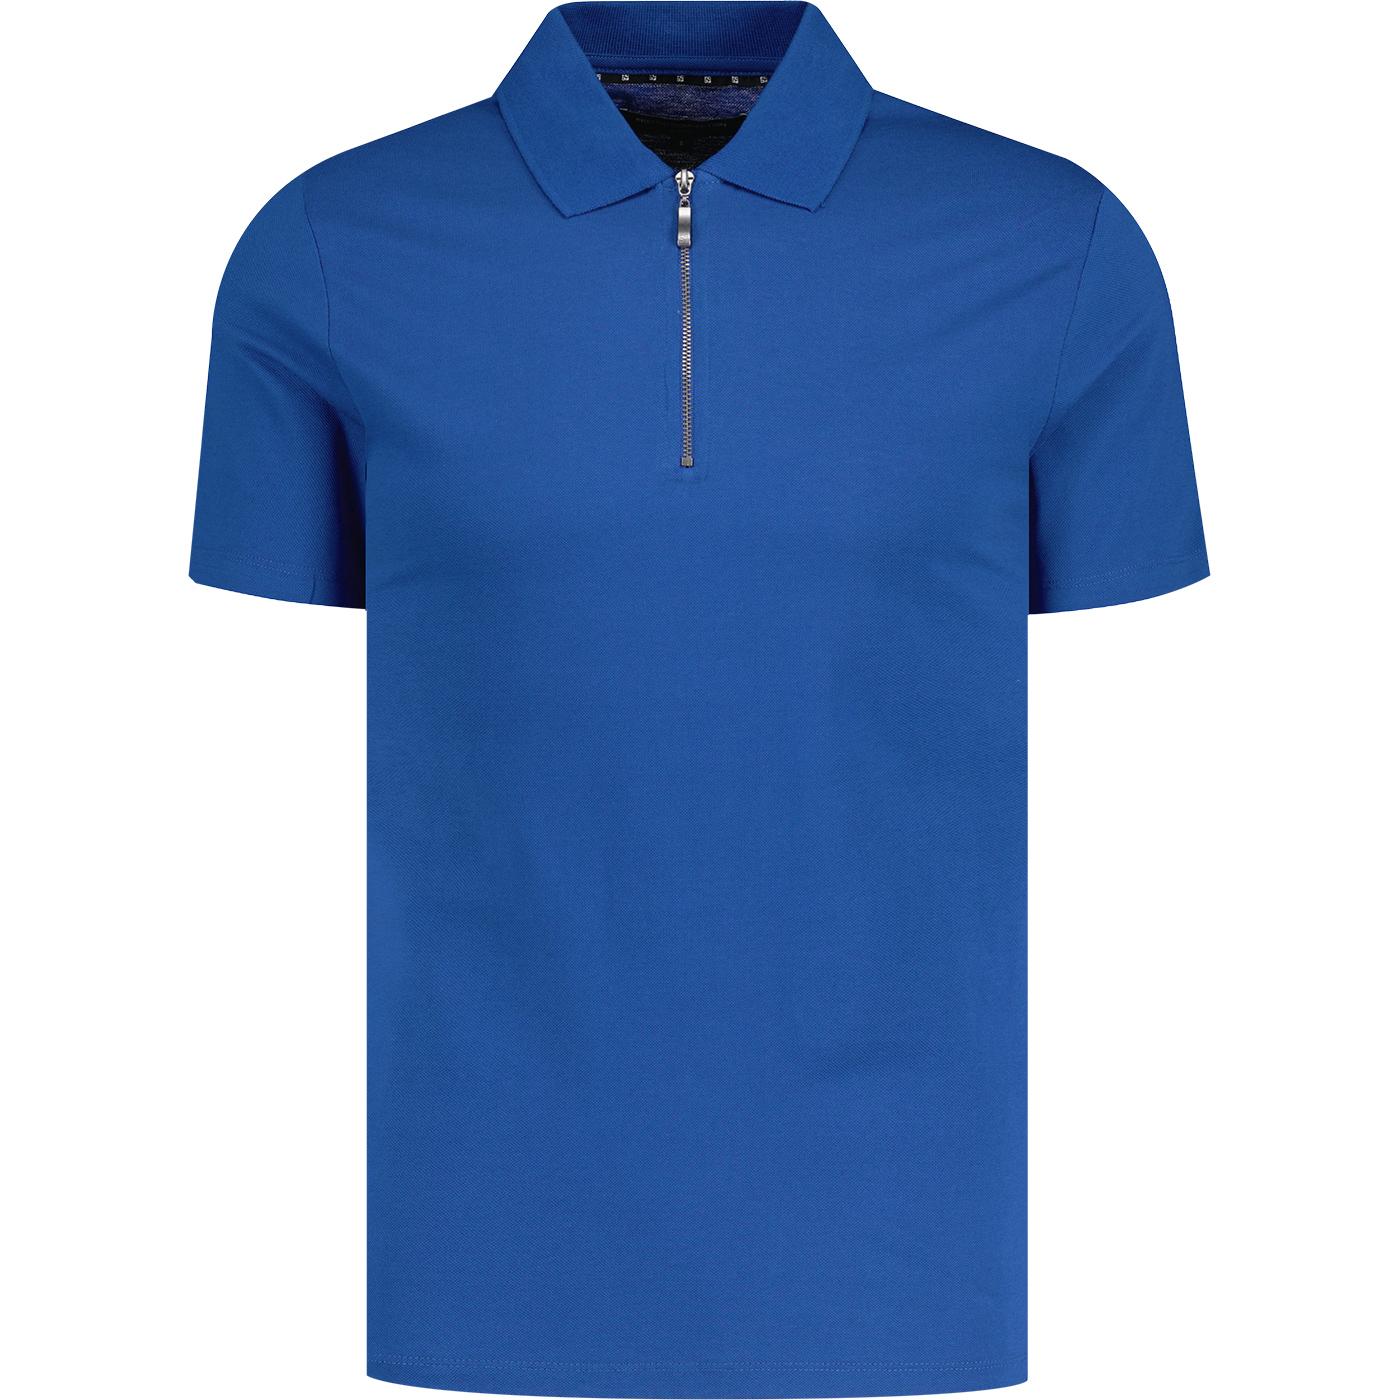 French Connection Zip Pique Polo Shirt (True Blue)